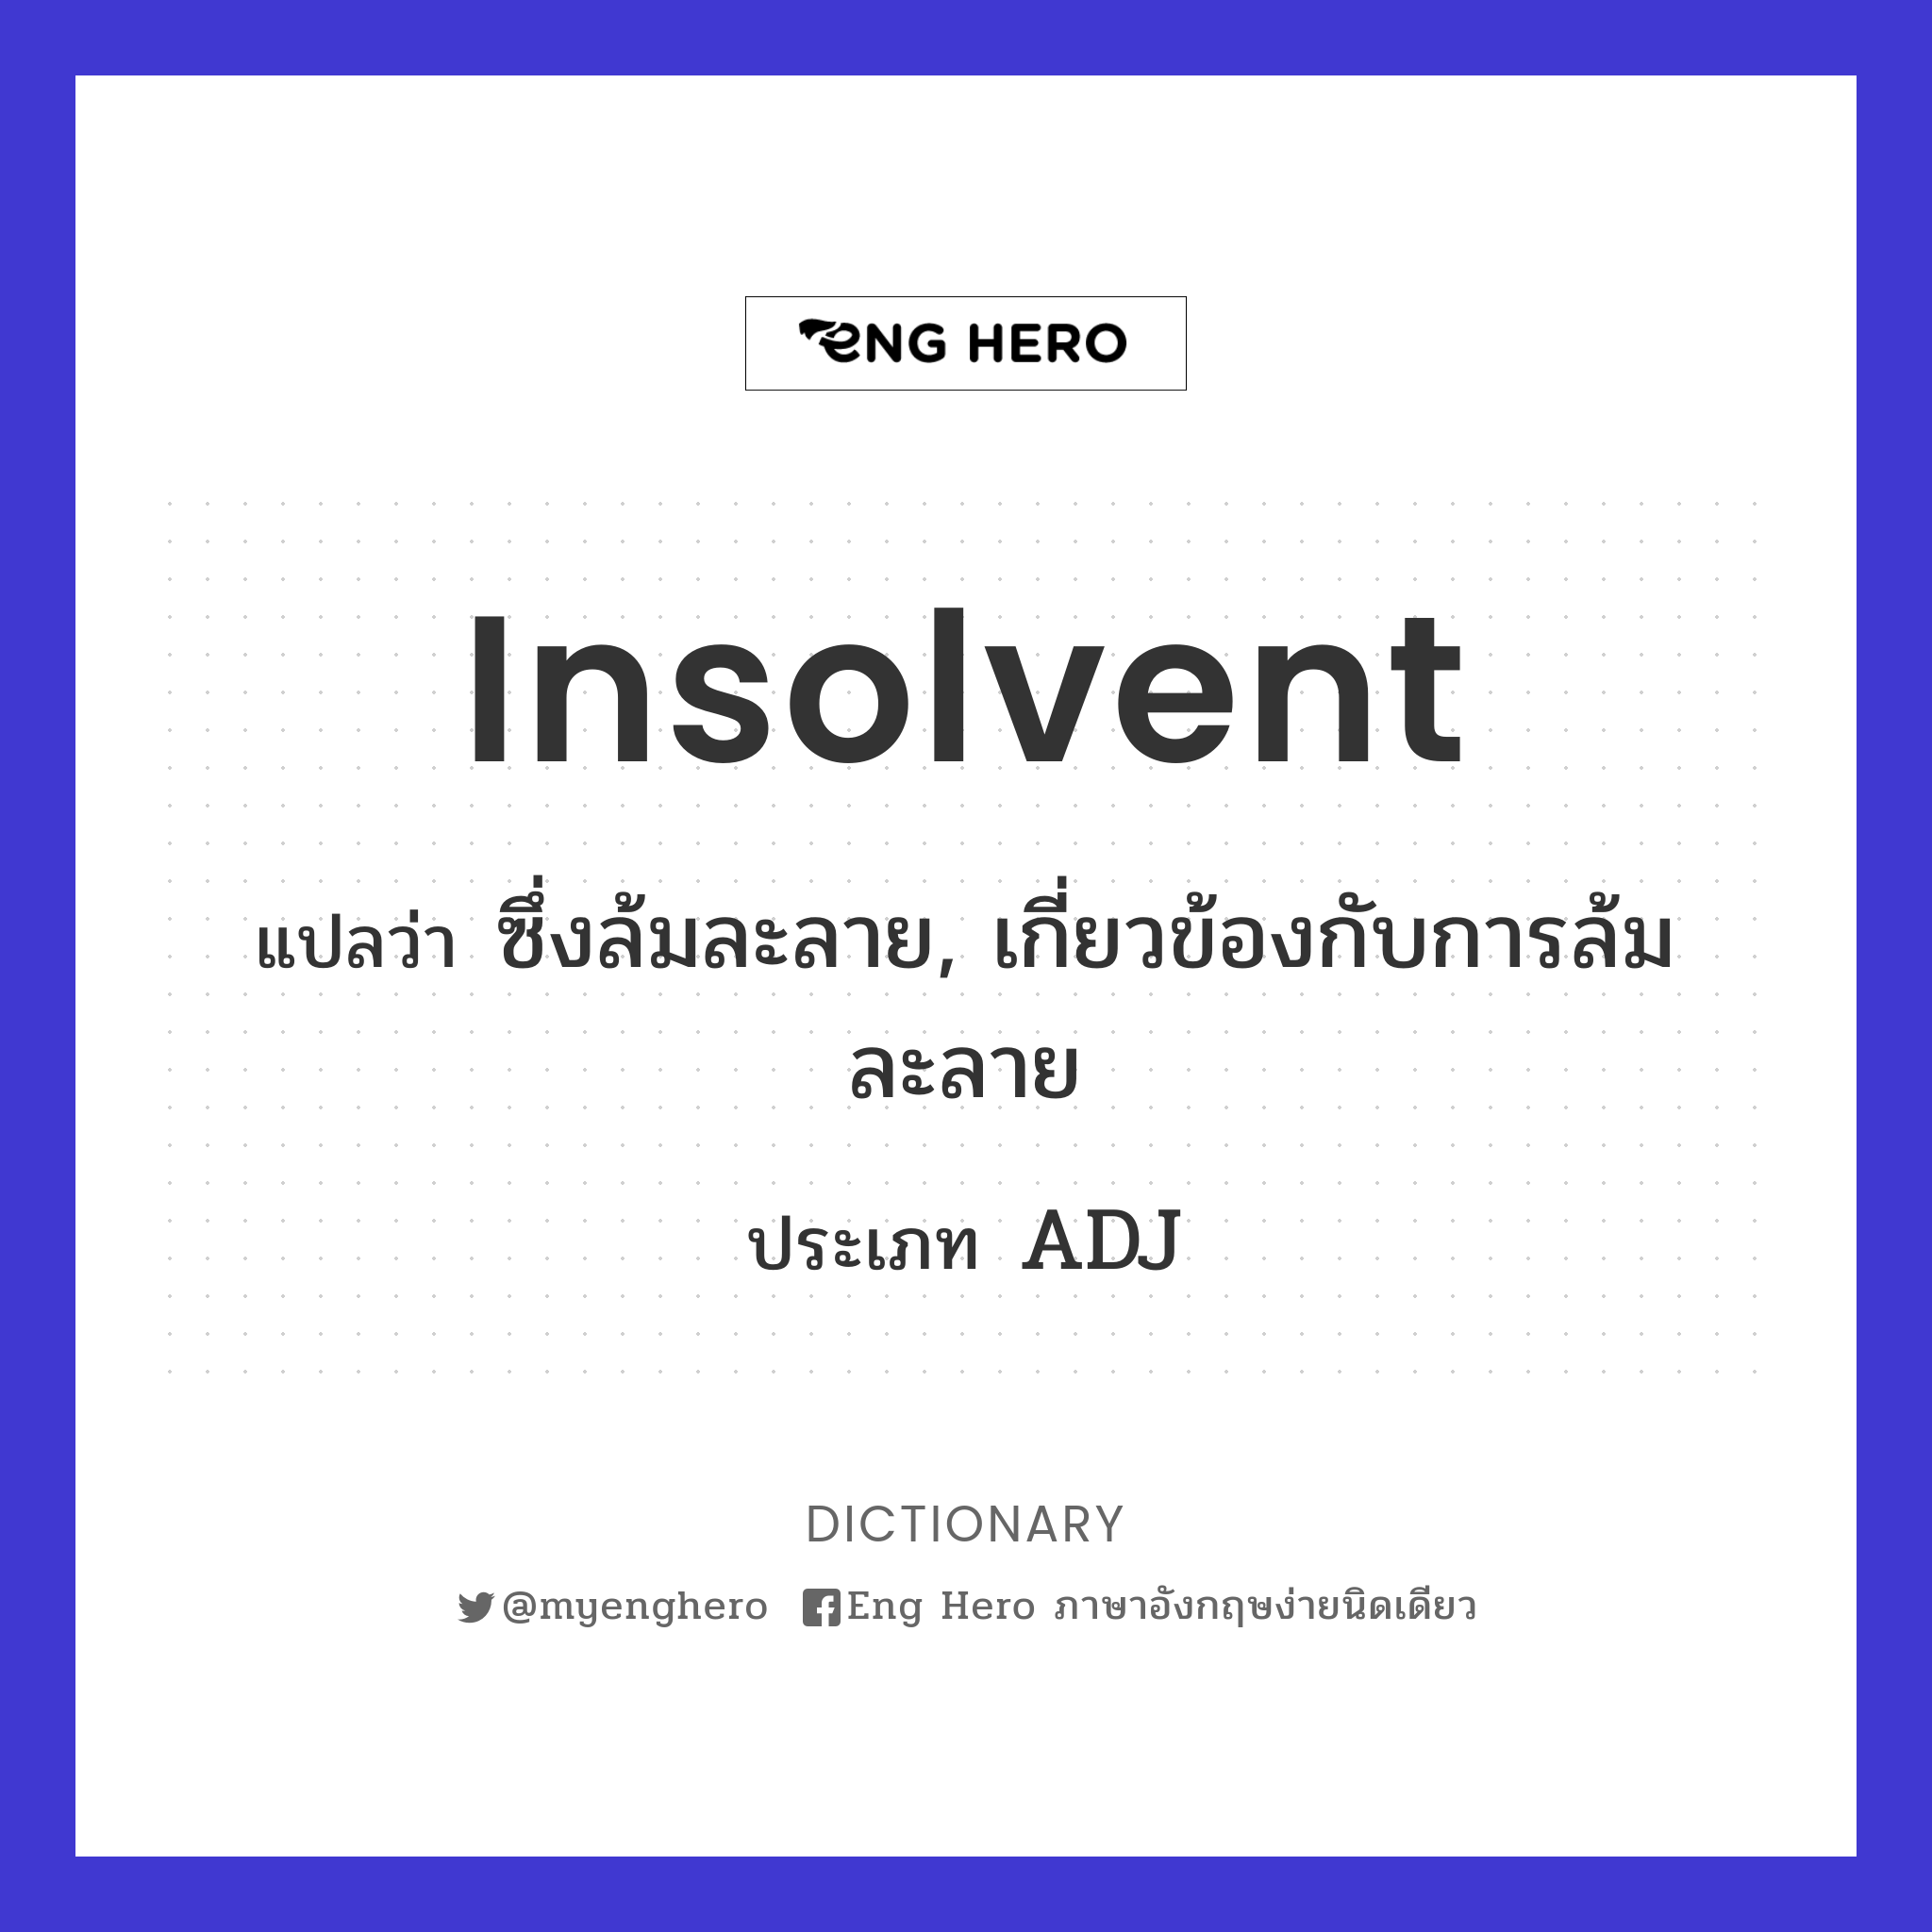 insolvent